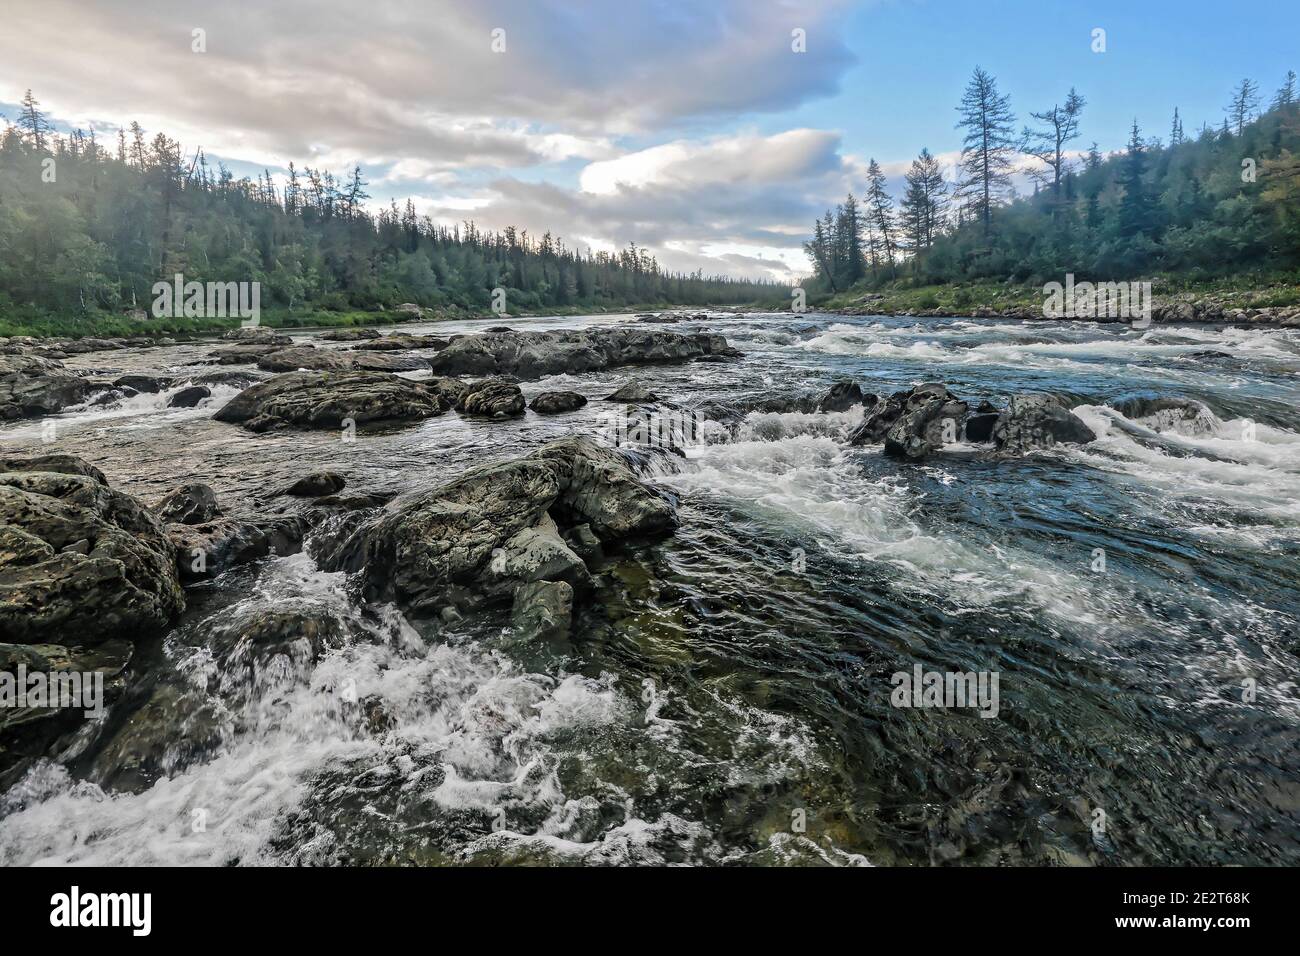 A rapid on the north river. Landscape with white water on a rapid. Stock Photo